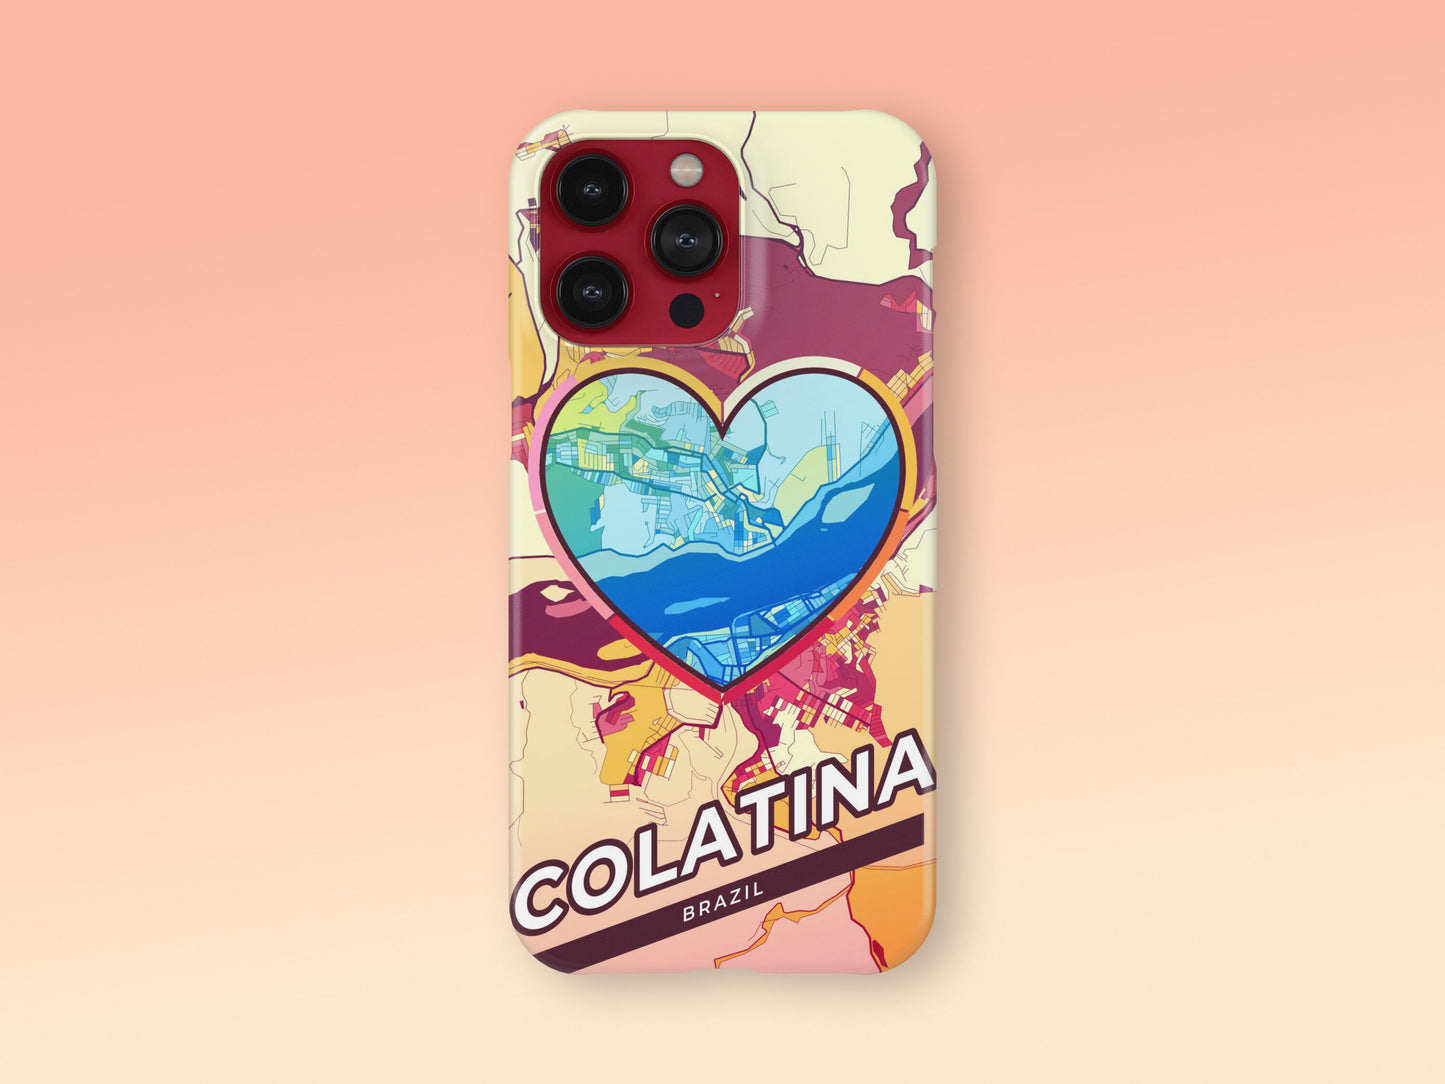 Colatina Brazil slim phone case with colorful icon. Birthday, wedding or housewarming gift. Couple match cases. 2